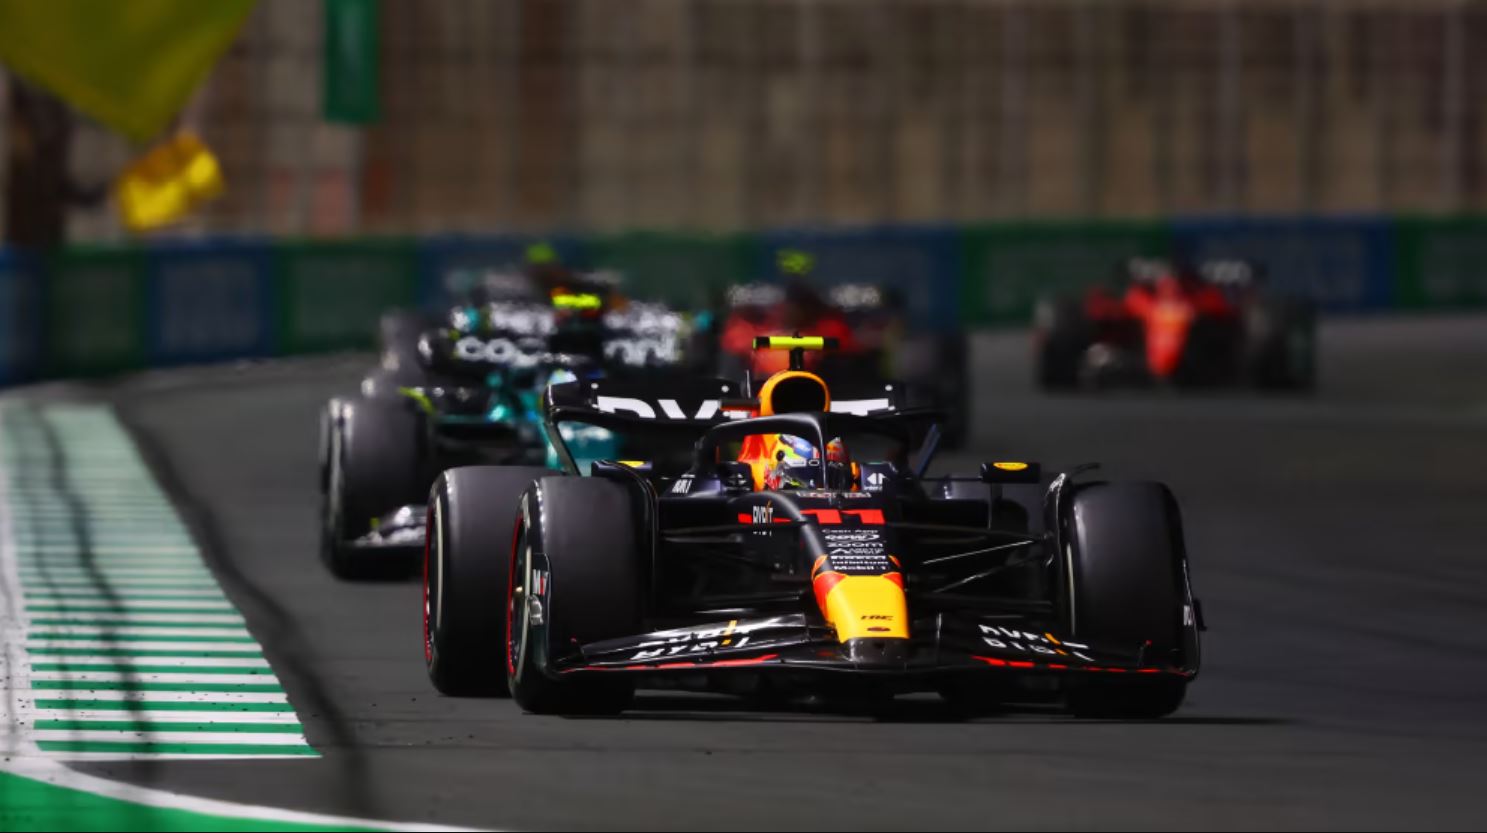 Perez fends off Verstappen to win action-packed Saudi Arabian GP as Alonso takes 100th podium formula1.com